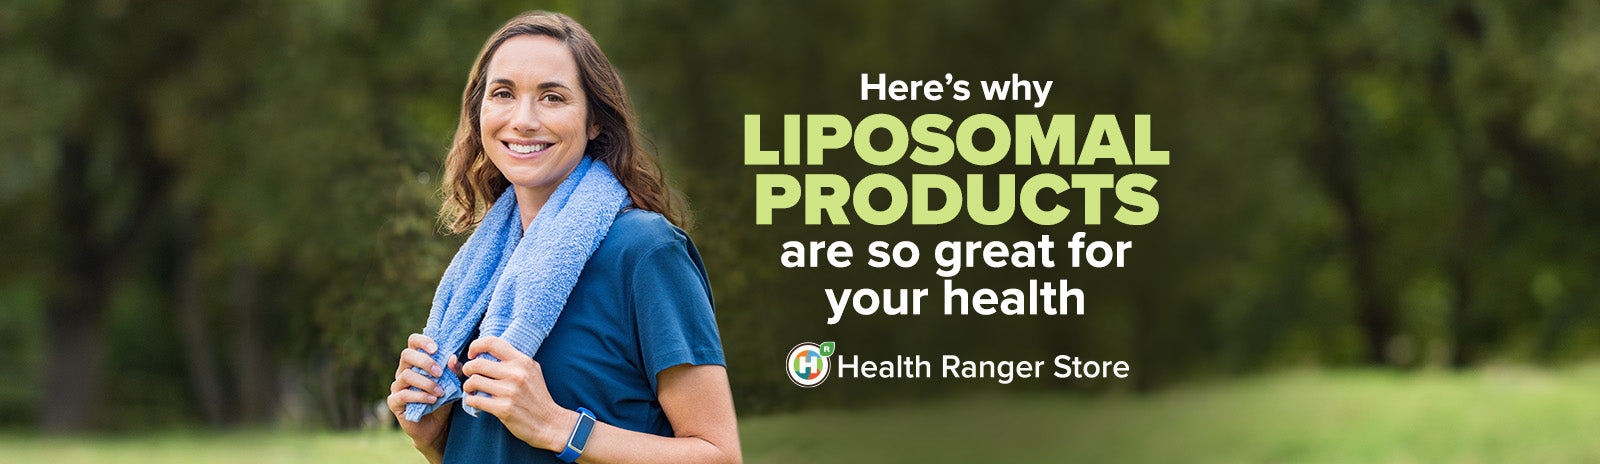 Here’s why Liposomal products are so great for your health